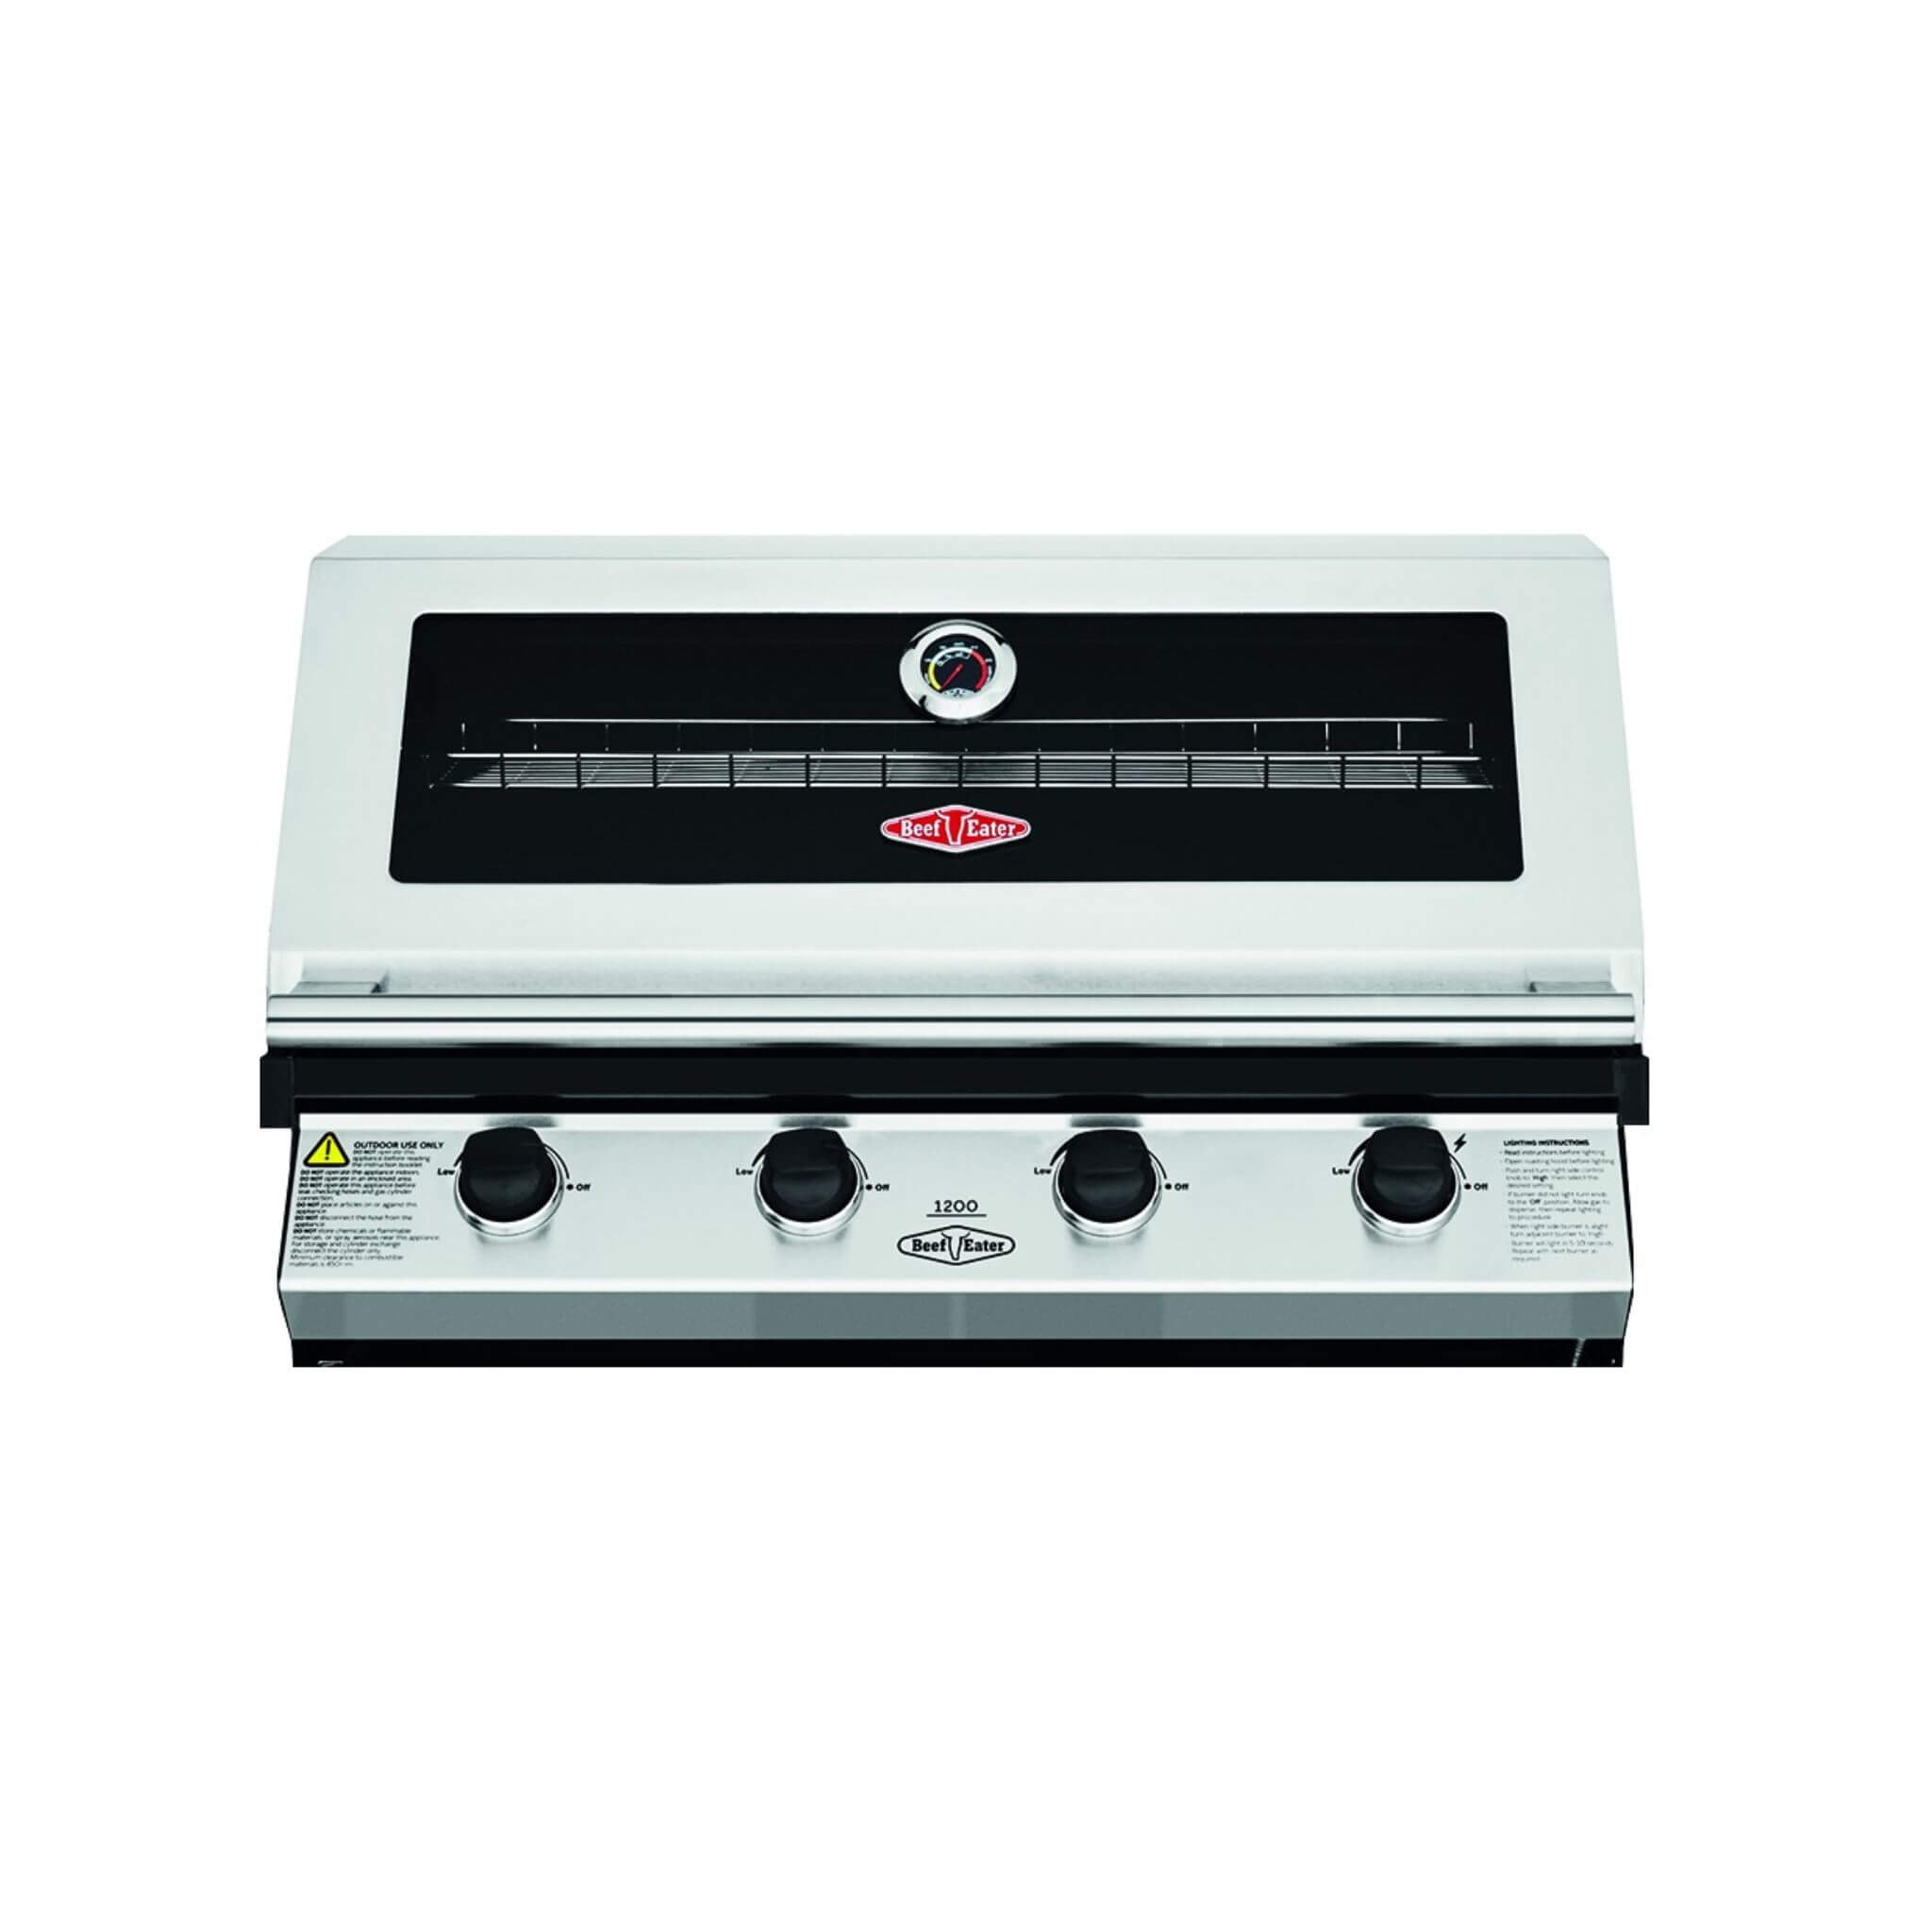 BeefEater Discovery 1200E Series - 4 Burner Built In Gas BBQ (Black Enamel or Stainless Steel)